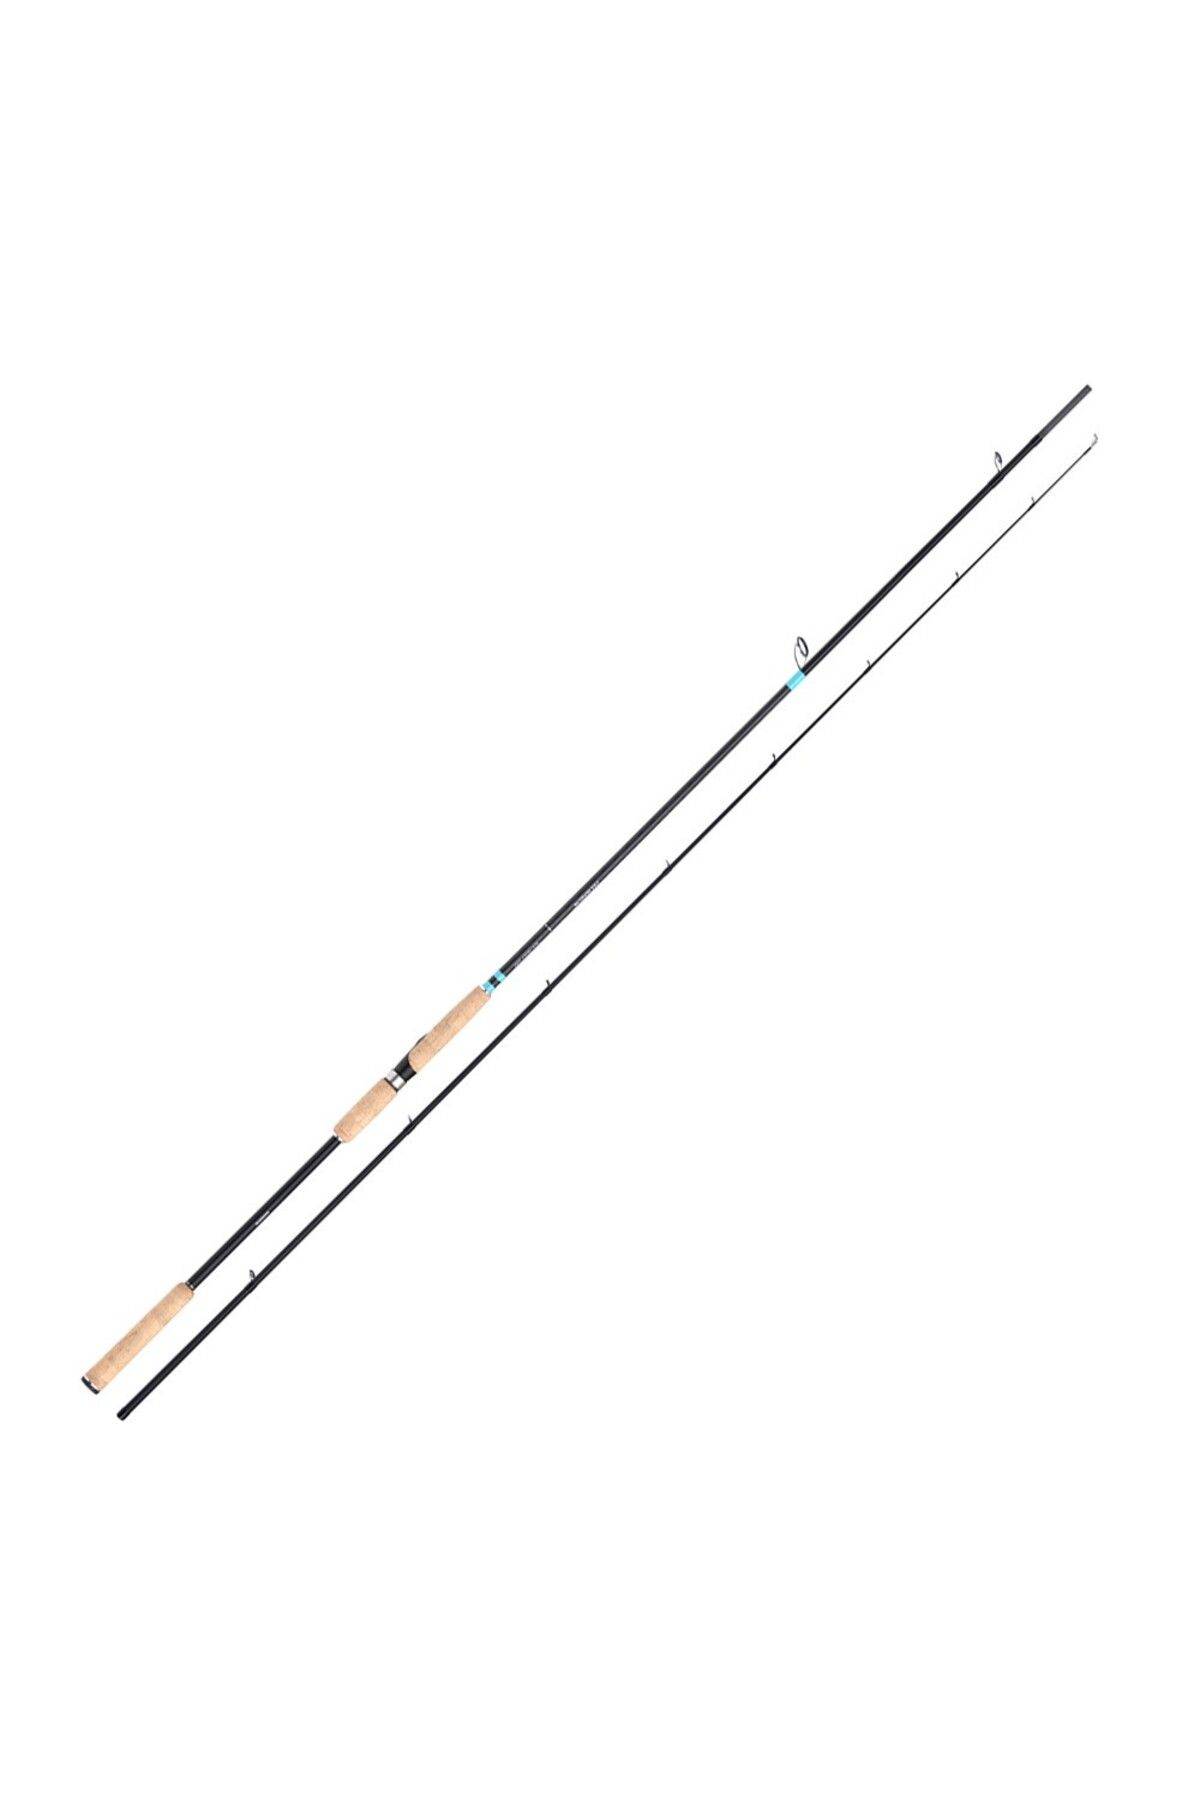 shimano Technium Spinning Sea Trout 2,51M 8'2" 7-30G 2Pc